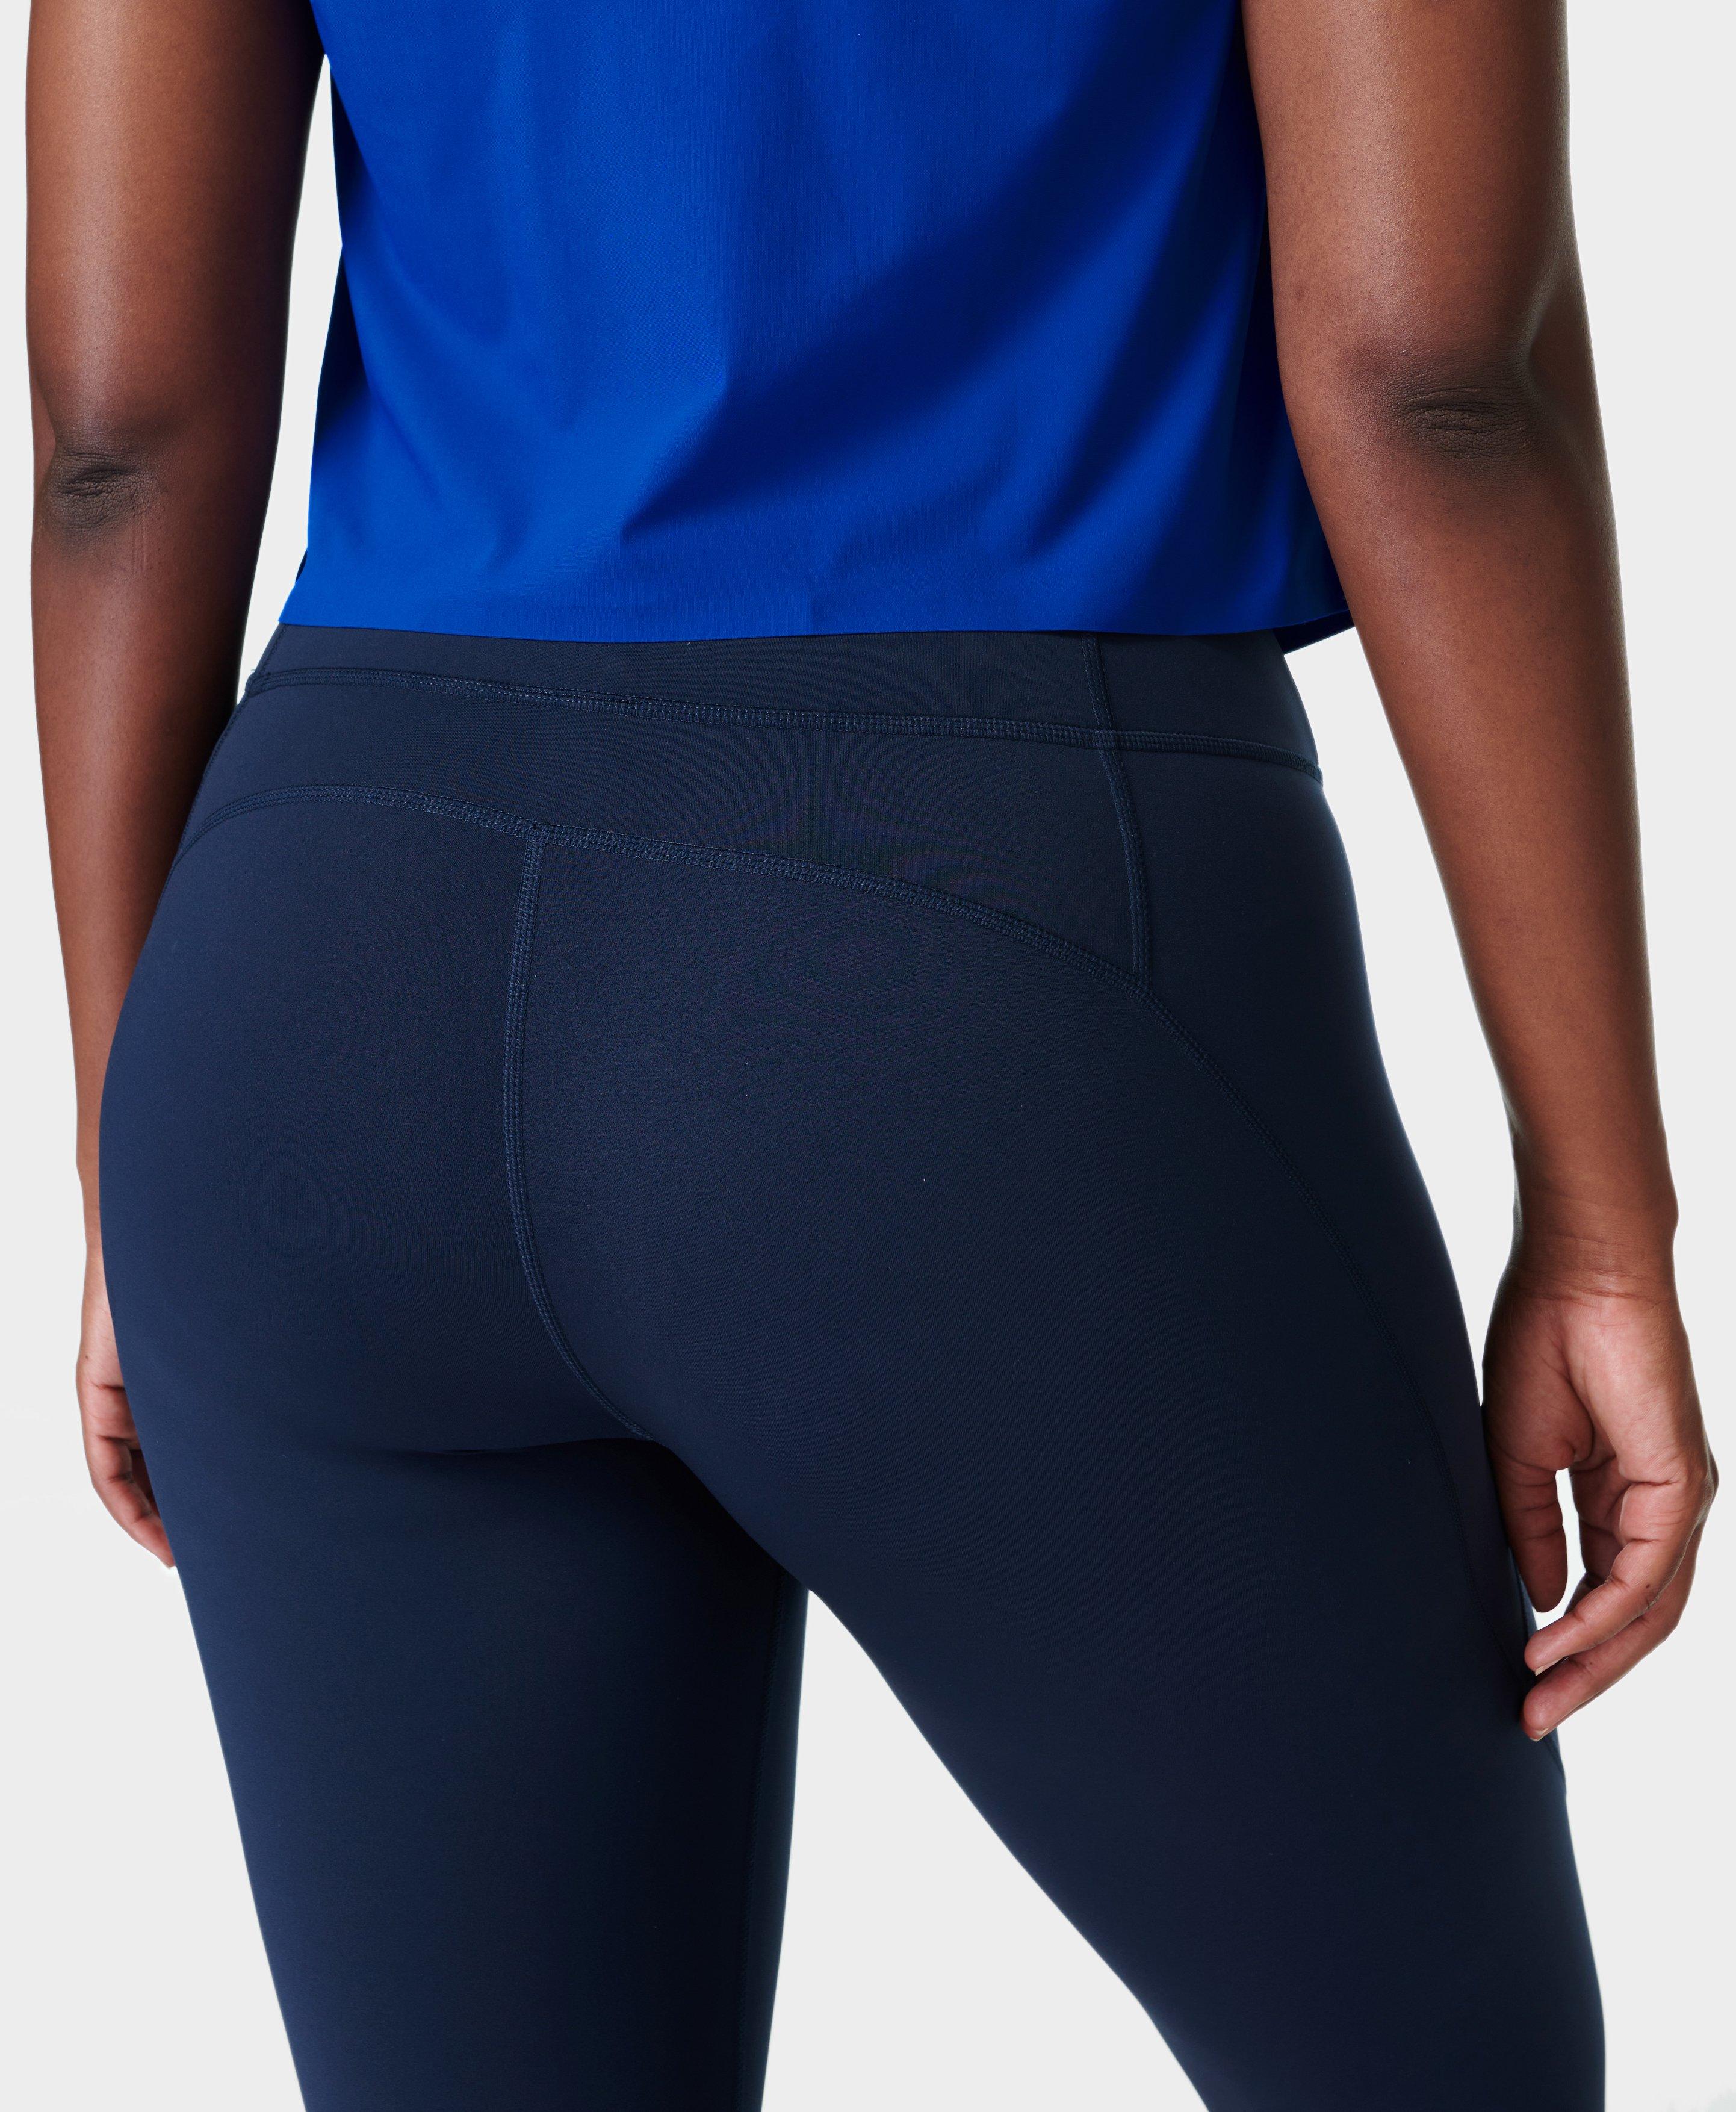 Circuit Women's Smooth Fit Leggings - Blue Navy - Size 18, BIG W